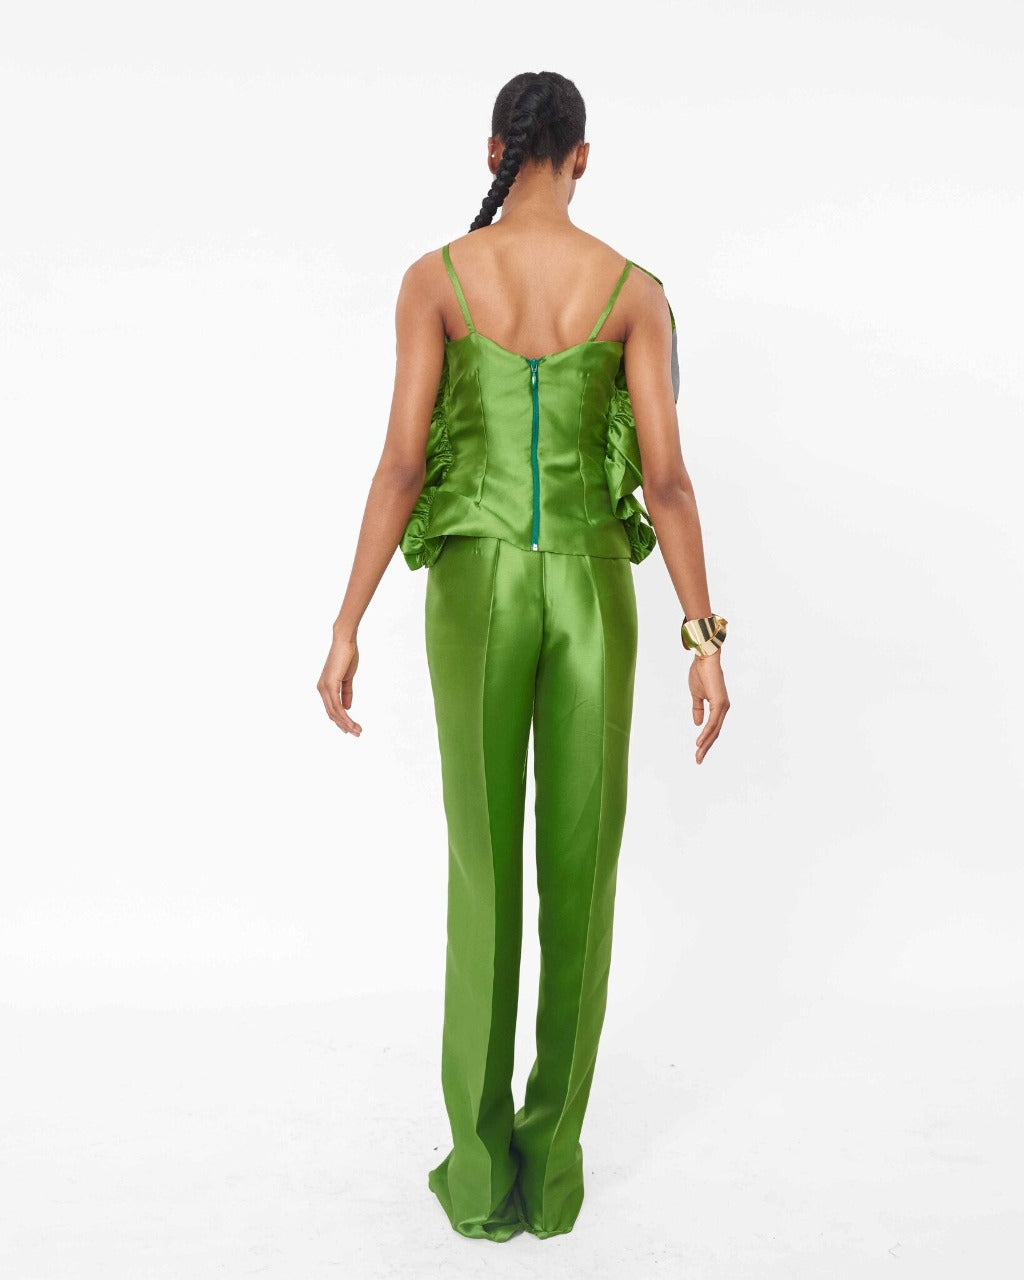 The back of a model wearing an Olive top with ruffle detail and an Olive high waist straight cut pant